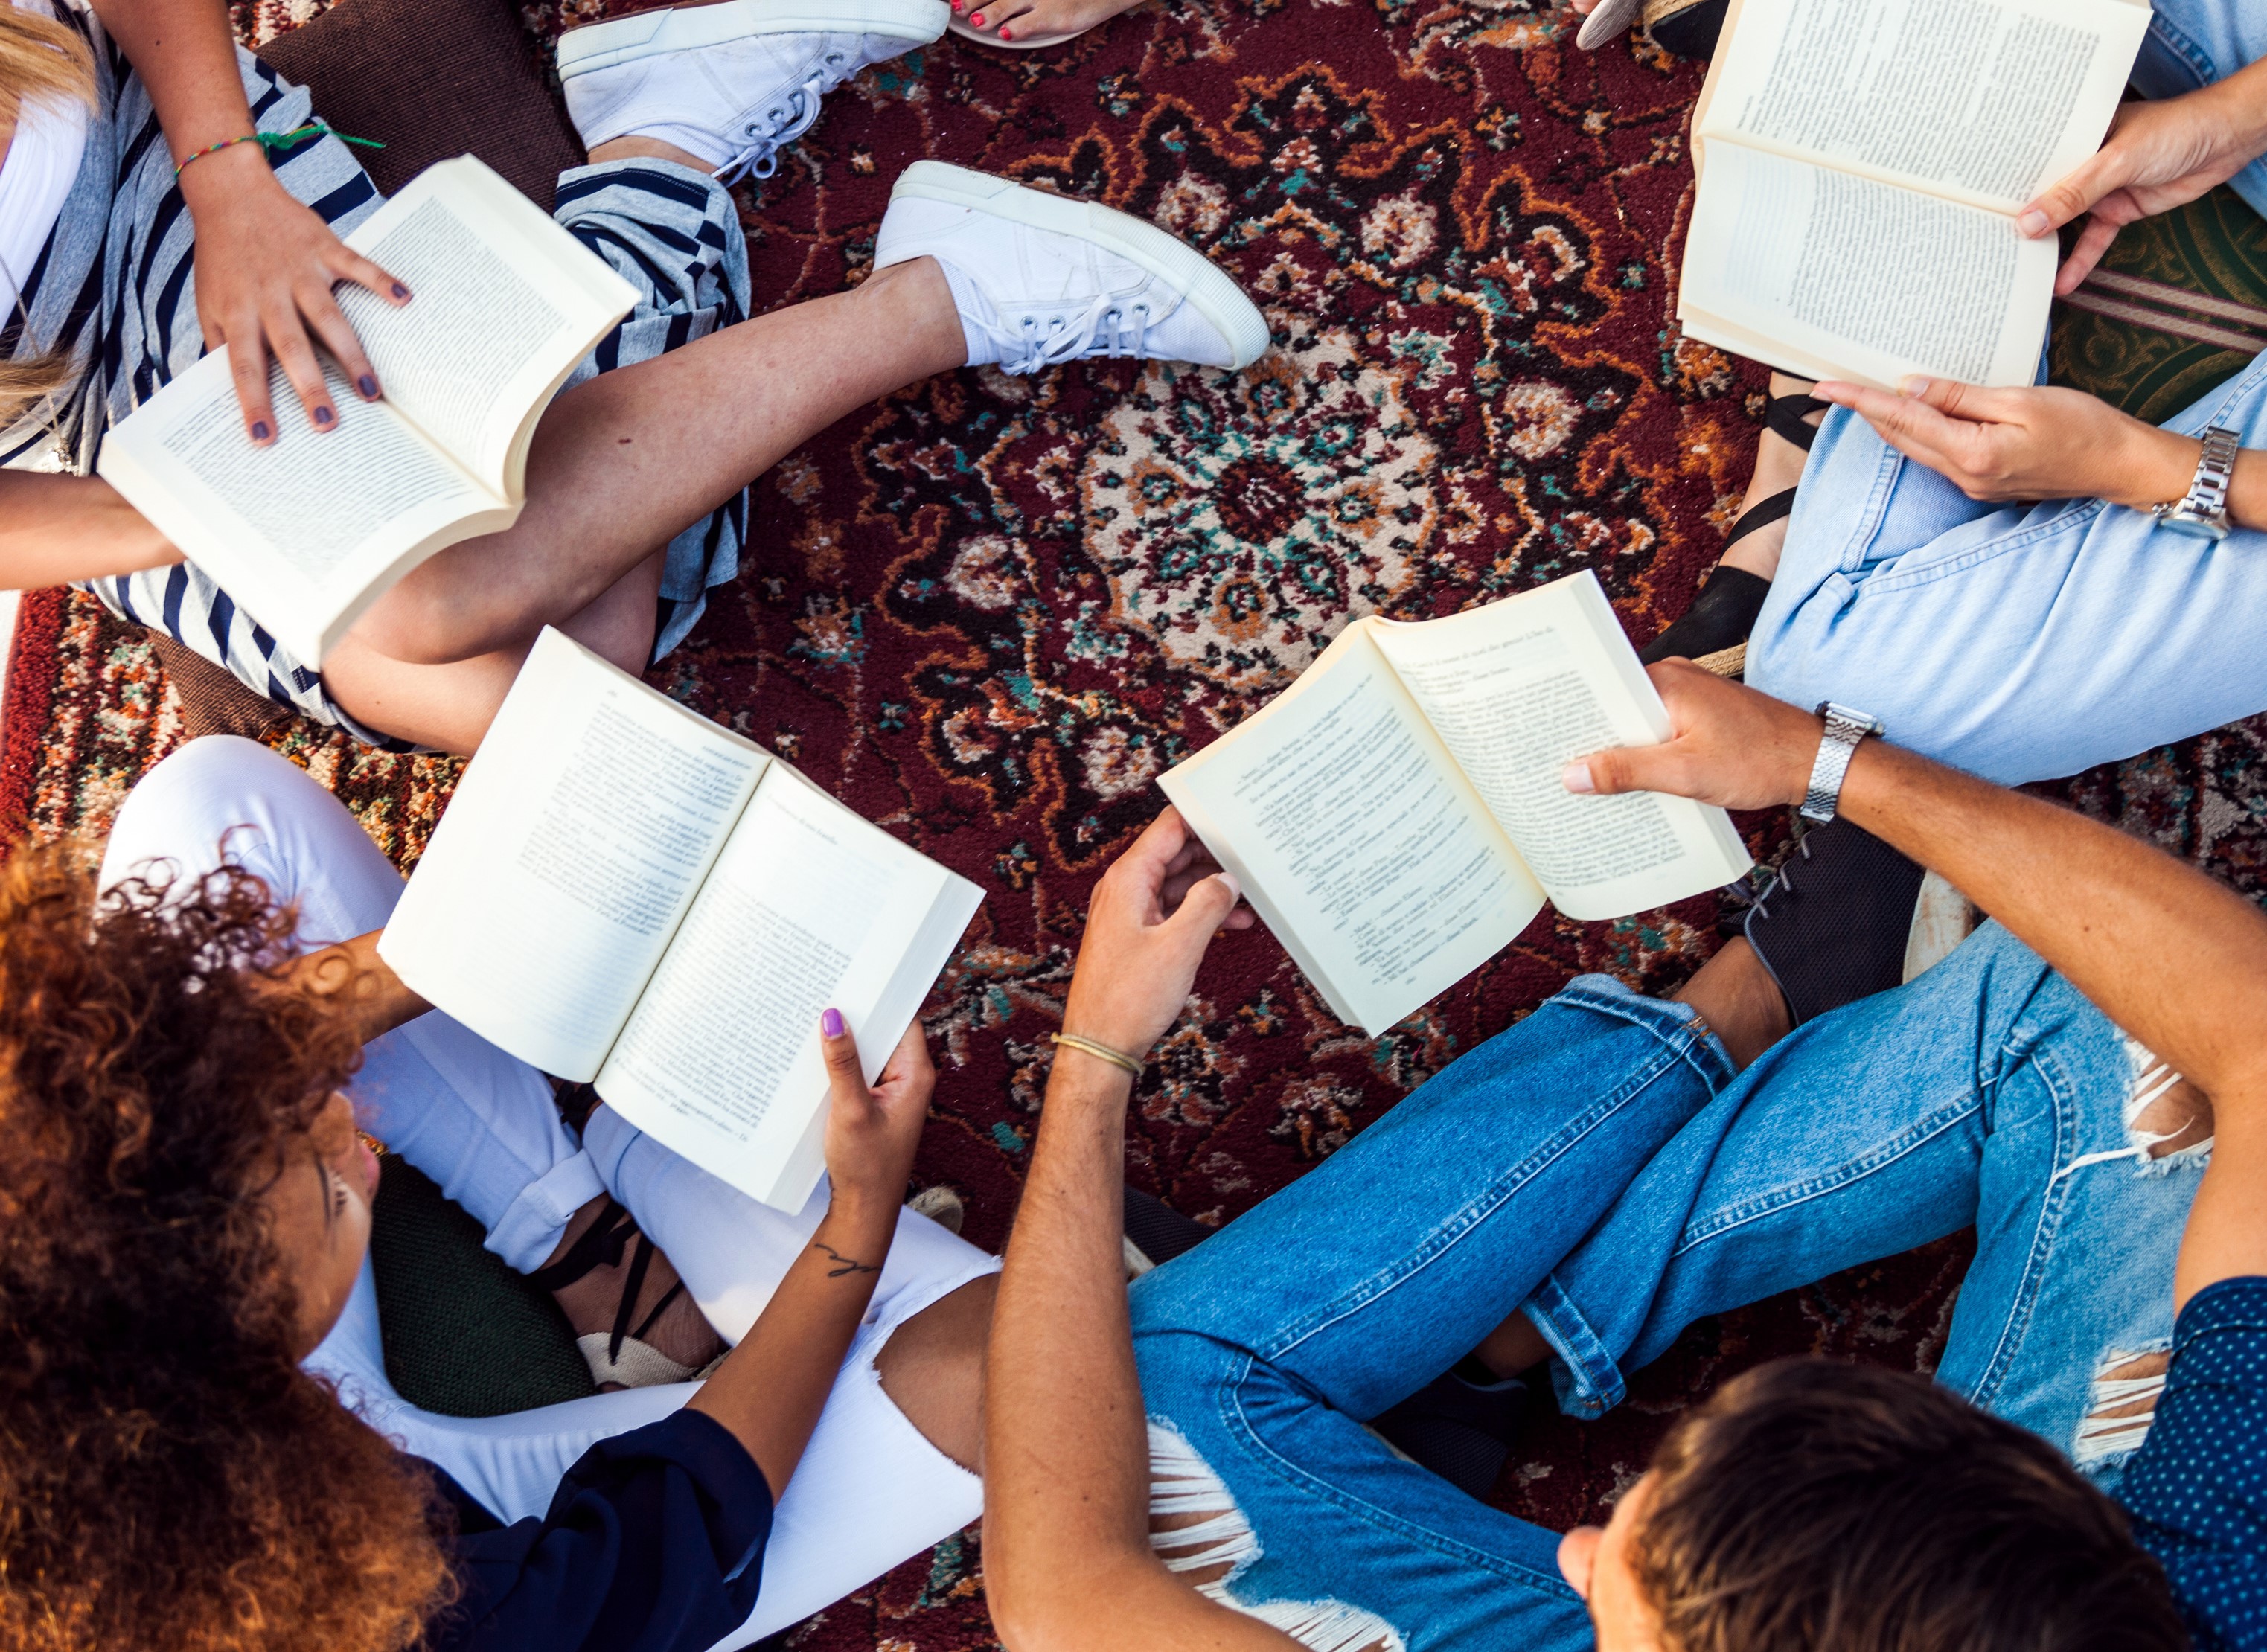 Photograph shows aerial image of four people sitting in a circle with books open in their laps.